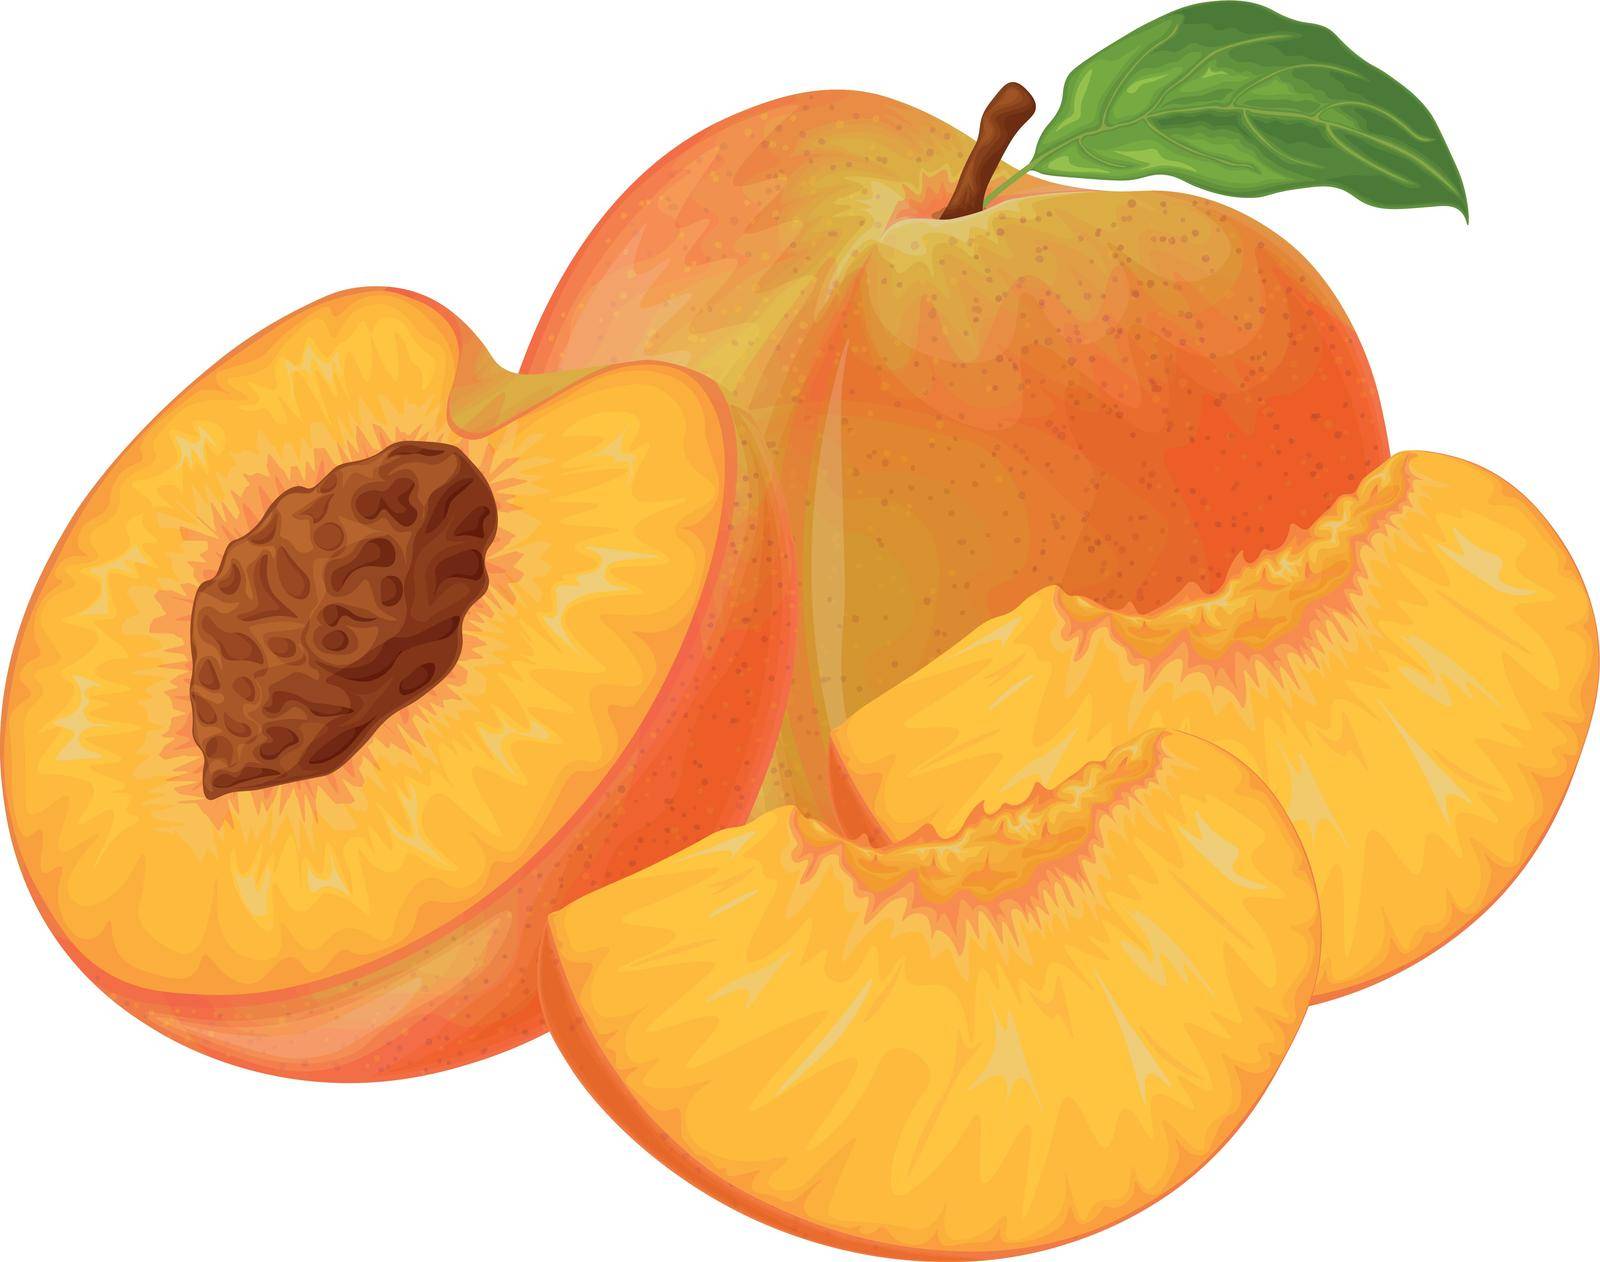 Peach. Image of a peach. Ripe juicy peach with a stone. Peach in the cut. Ripe fruit. Vegetarian vitamin product. Vector illustration.